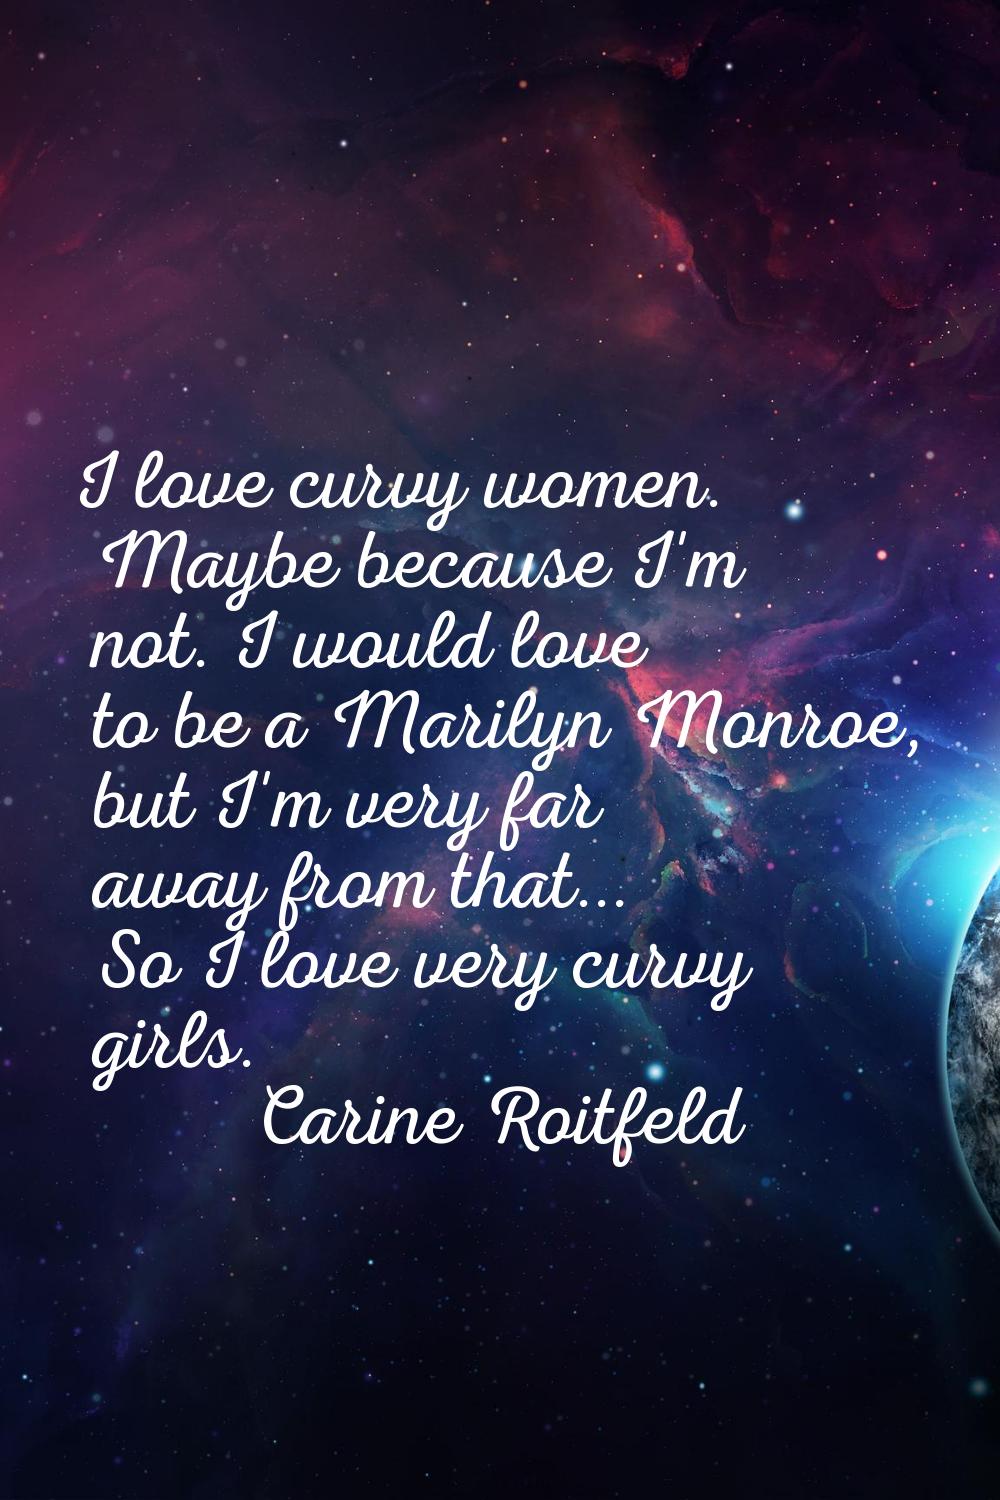 I love curvy women. Maybe because I'm not. I would love to be a Marilyn Monroe, but I'm very far aw